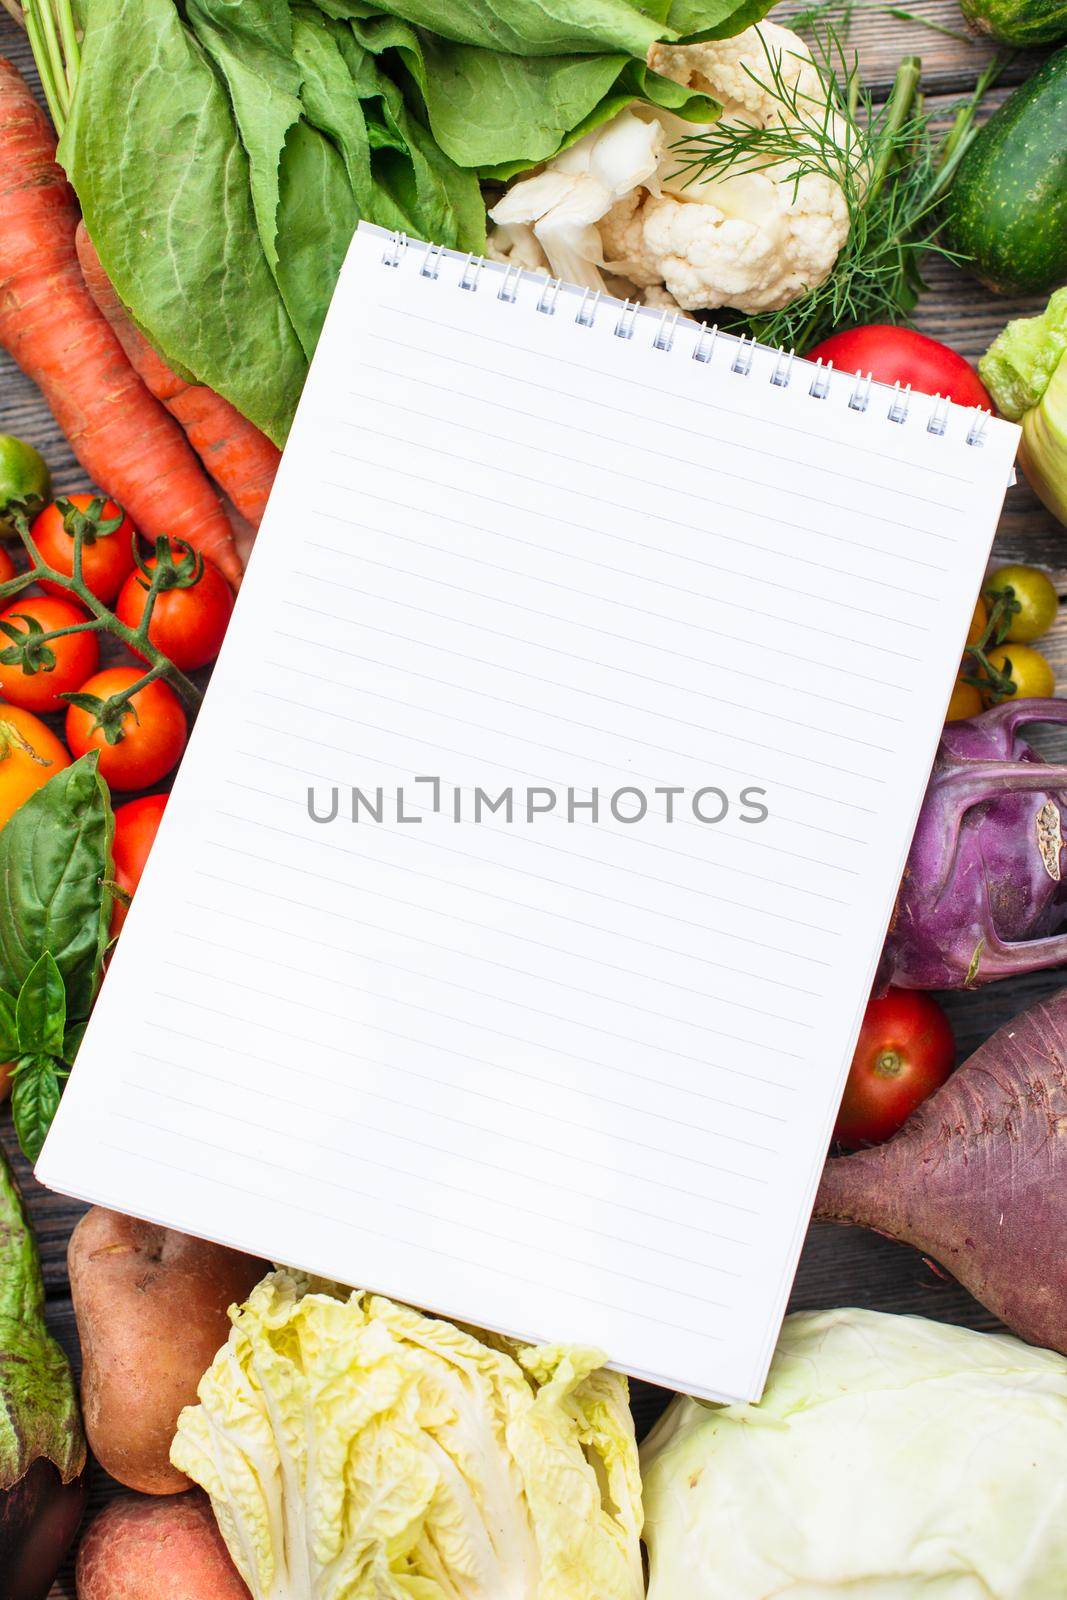 Shopping list on the vegetables with copy space